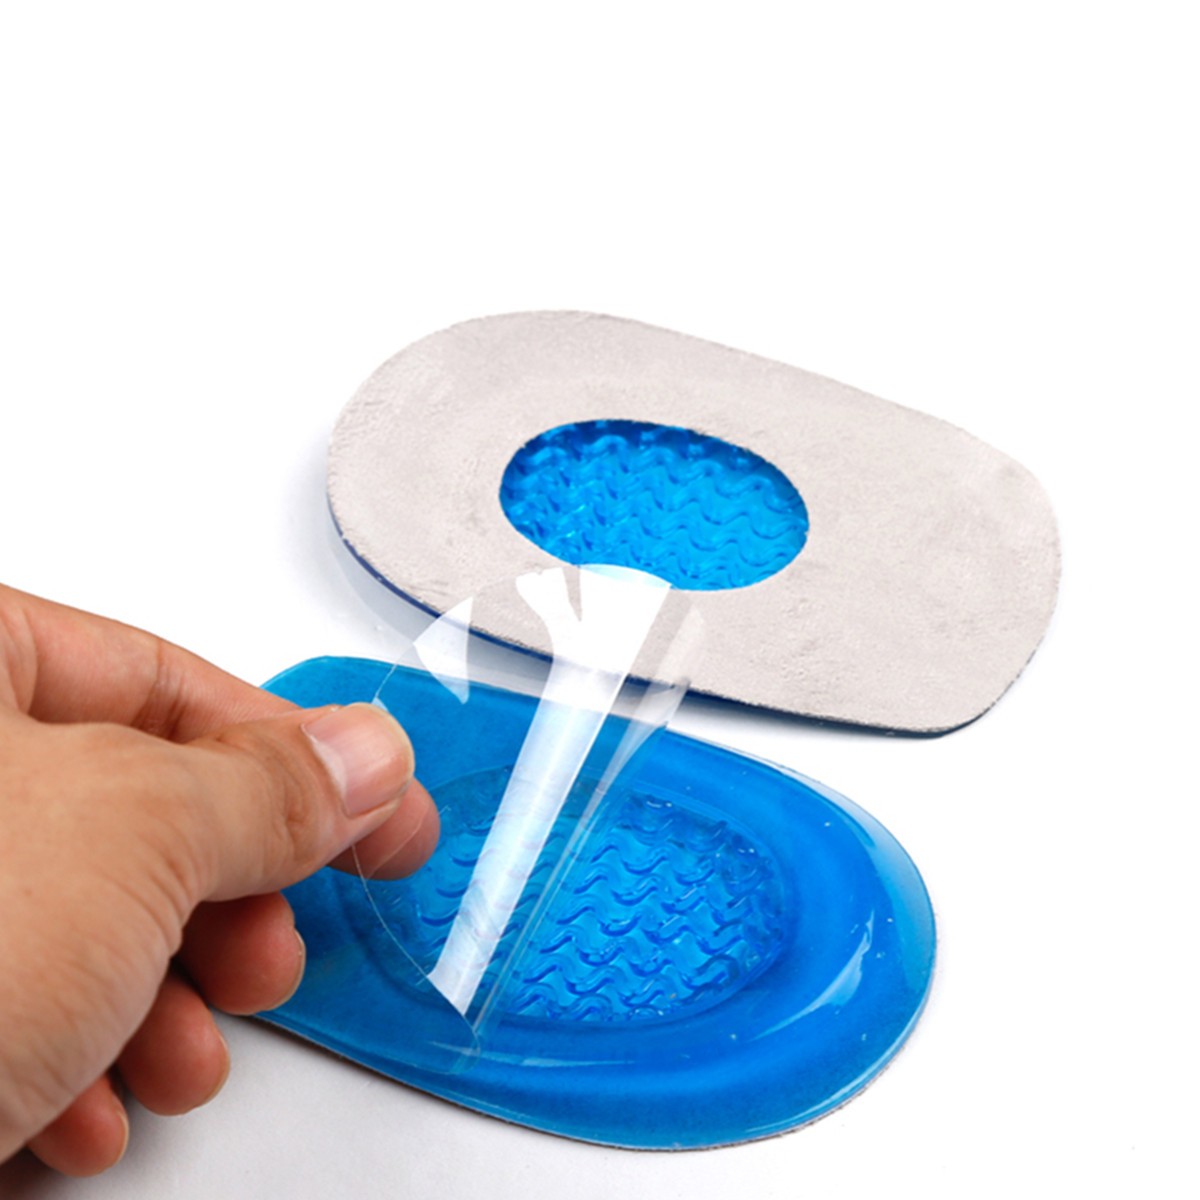 BSAID Heel Inserts Cushion Silicone Shoe Insoles Women Men Foot Pads Silicon Gel Insoles for Spur Plantar Fasciitis Foot Protect